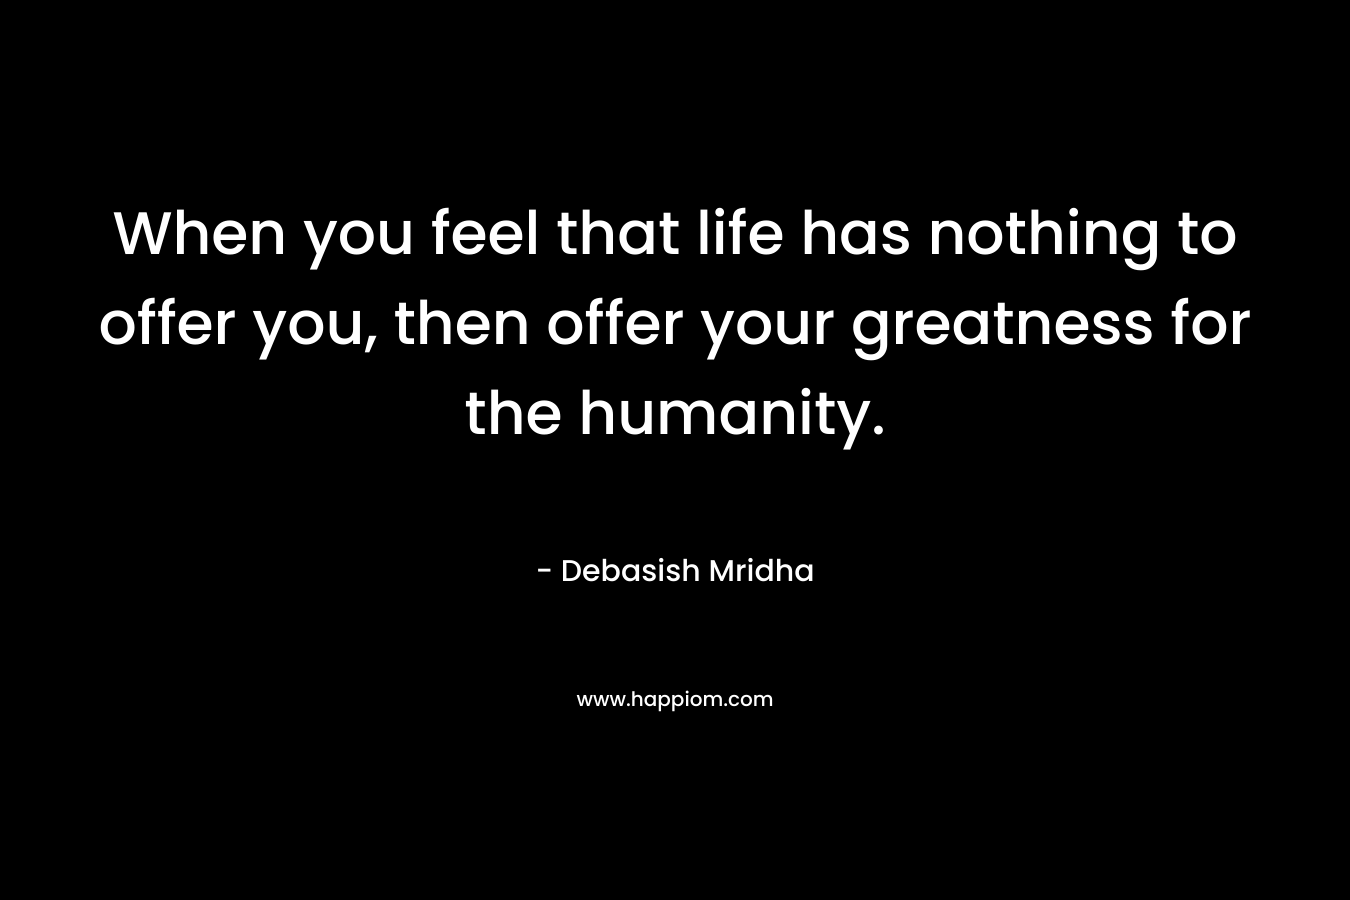 When you feel that life has nothing to offer you, then offer your greatness for the humanity.